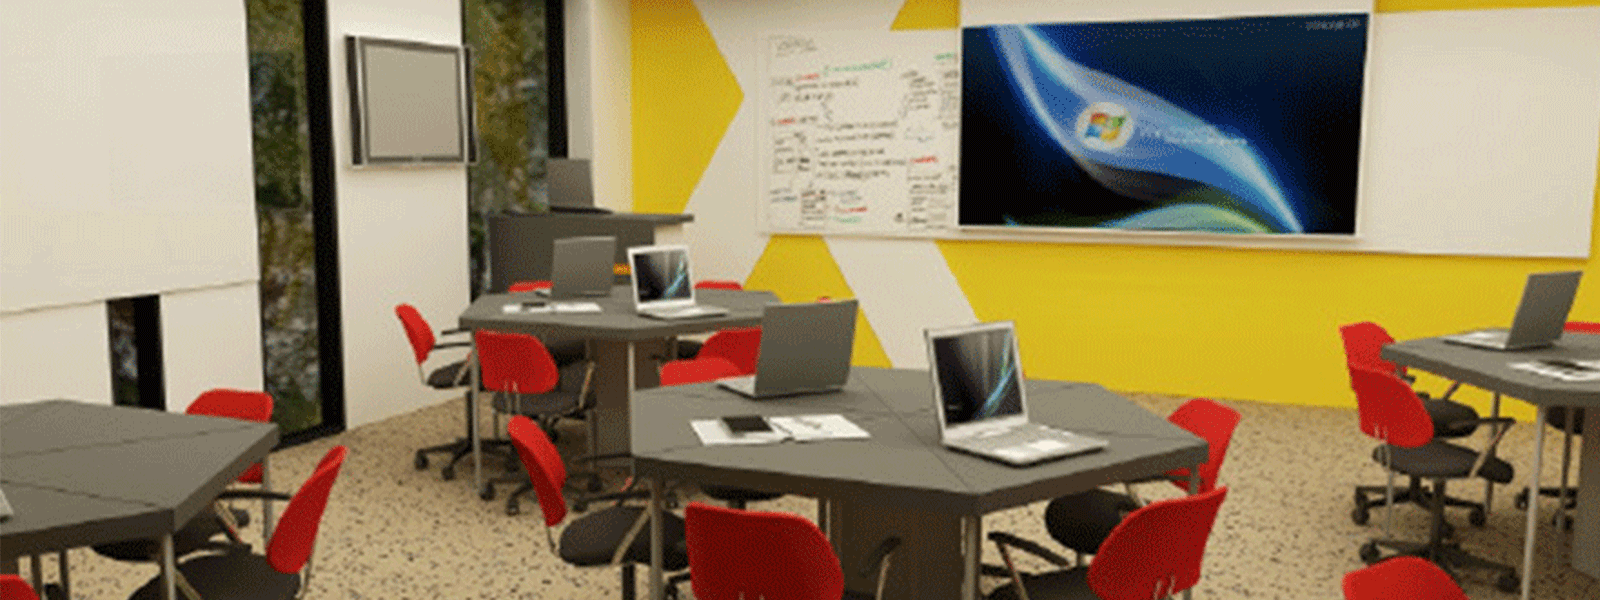 collaborative-spaces-bottom-updated